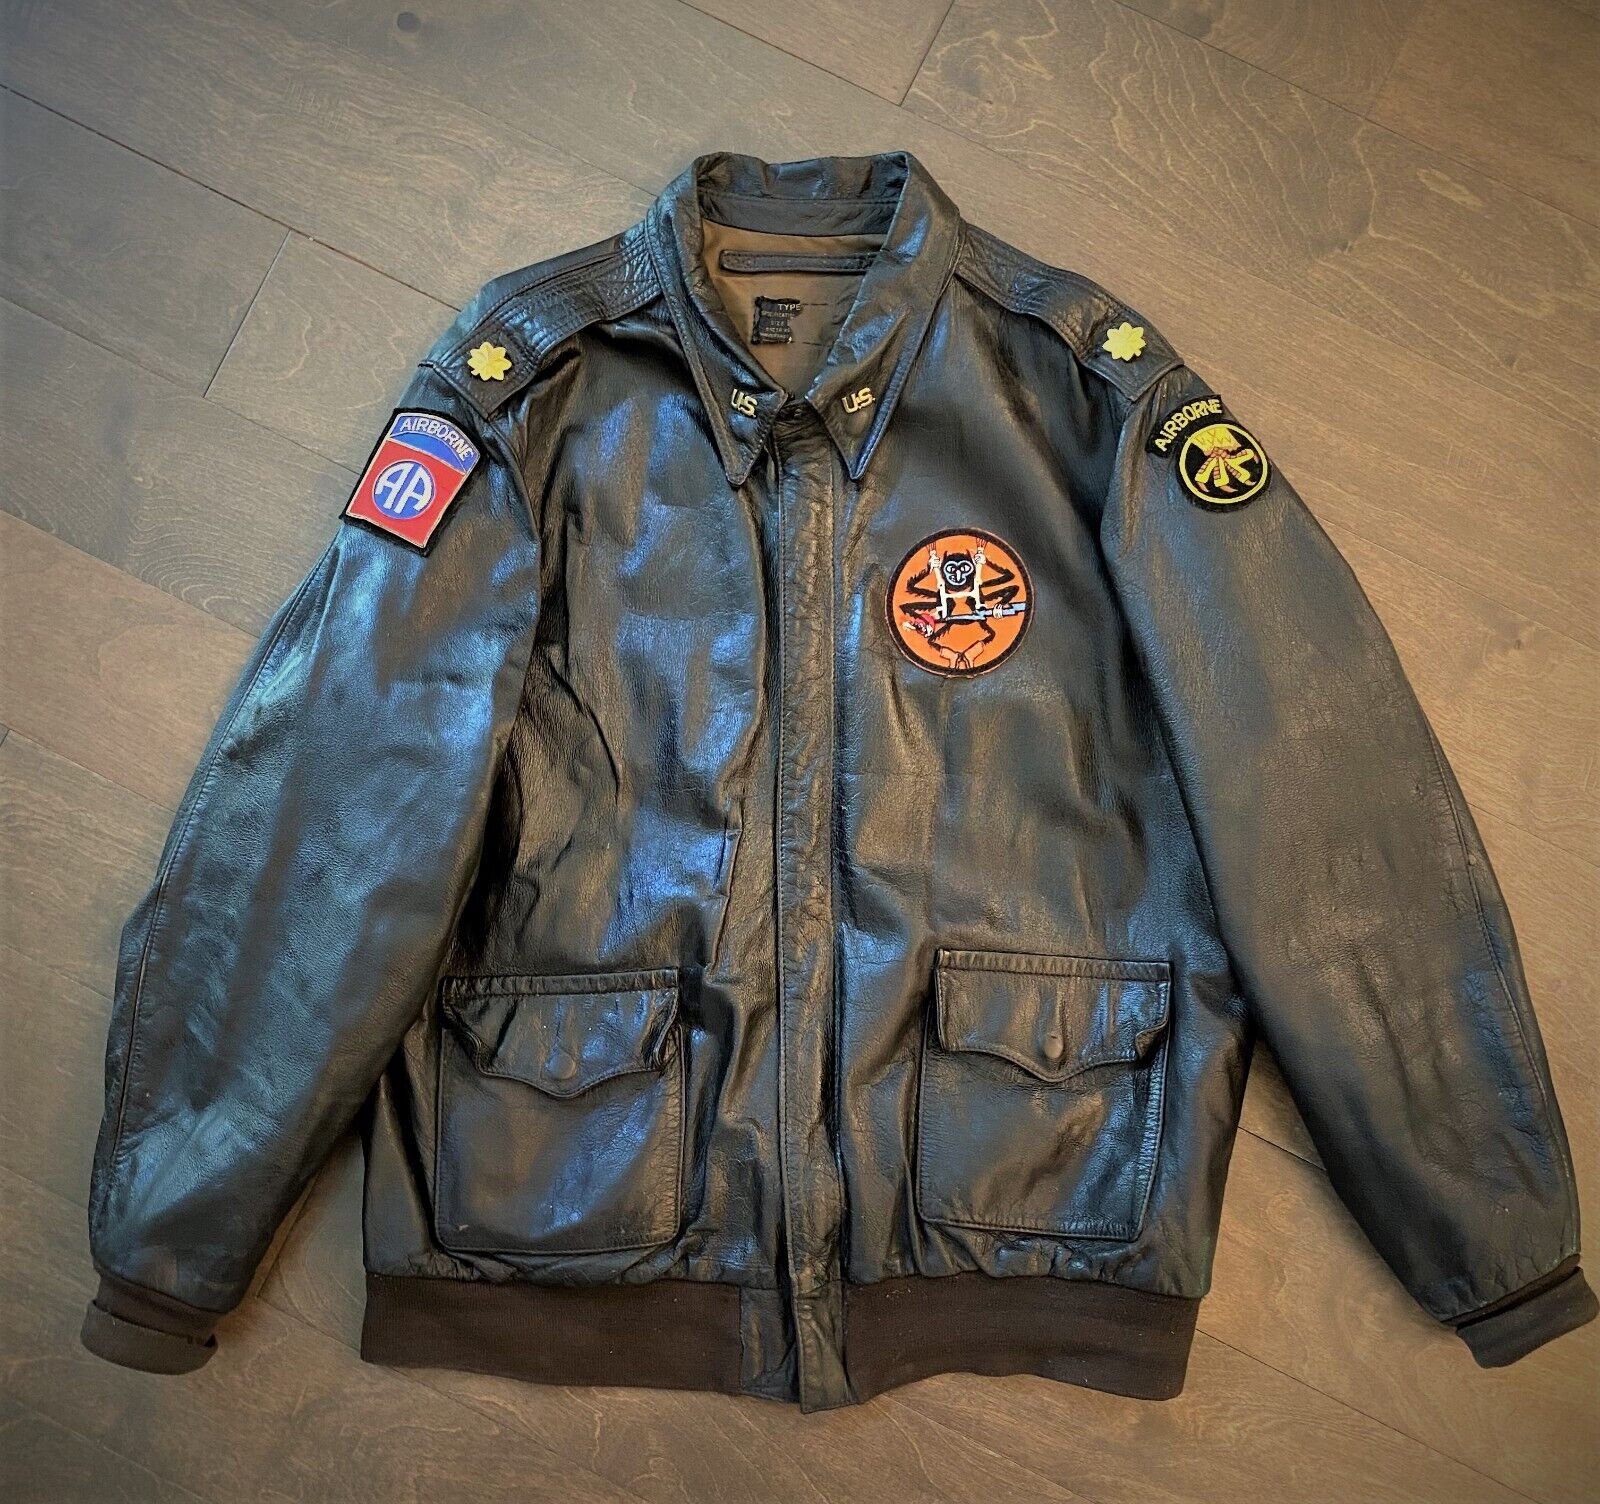 A2 LEATHER JACKET - PARATROOPER - 82nd & 17th AIRBORNE - 507th PIR ...